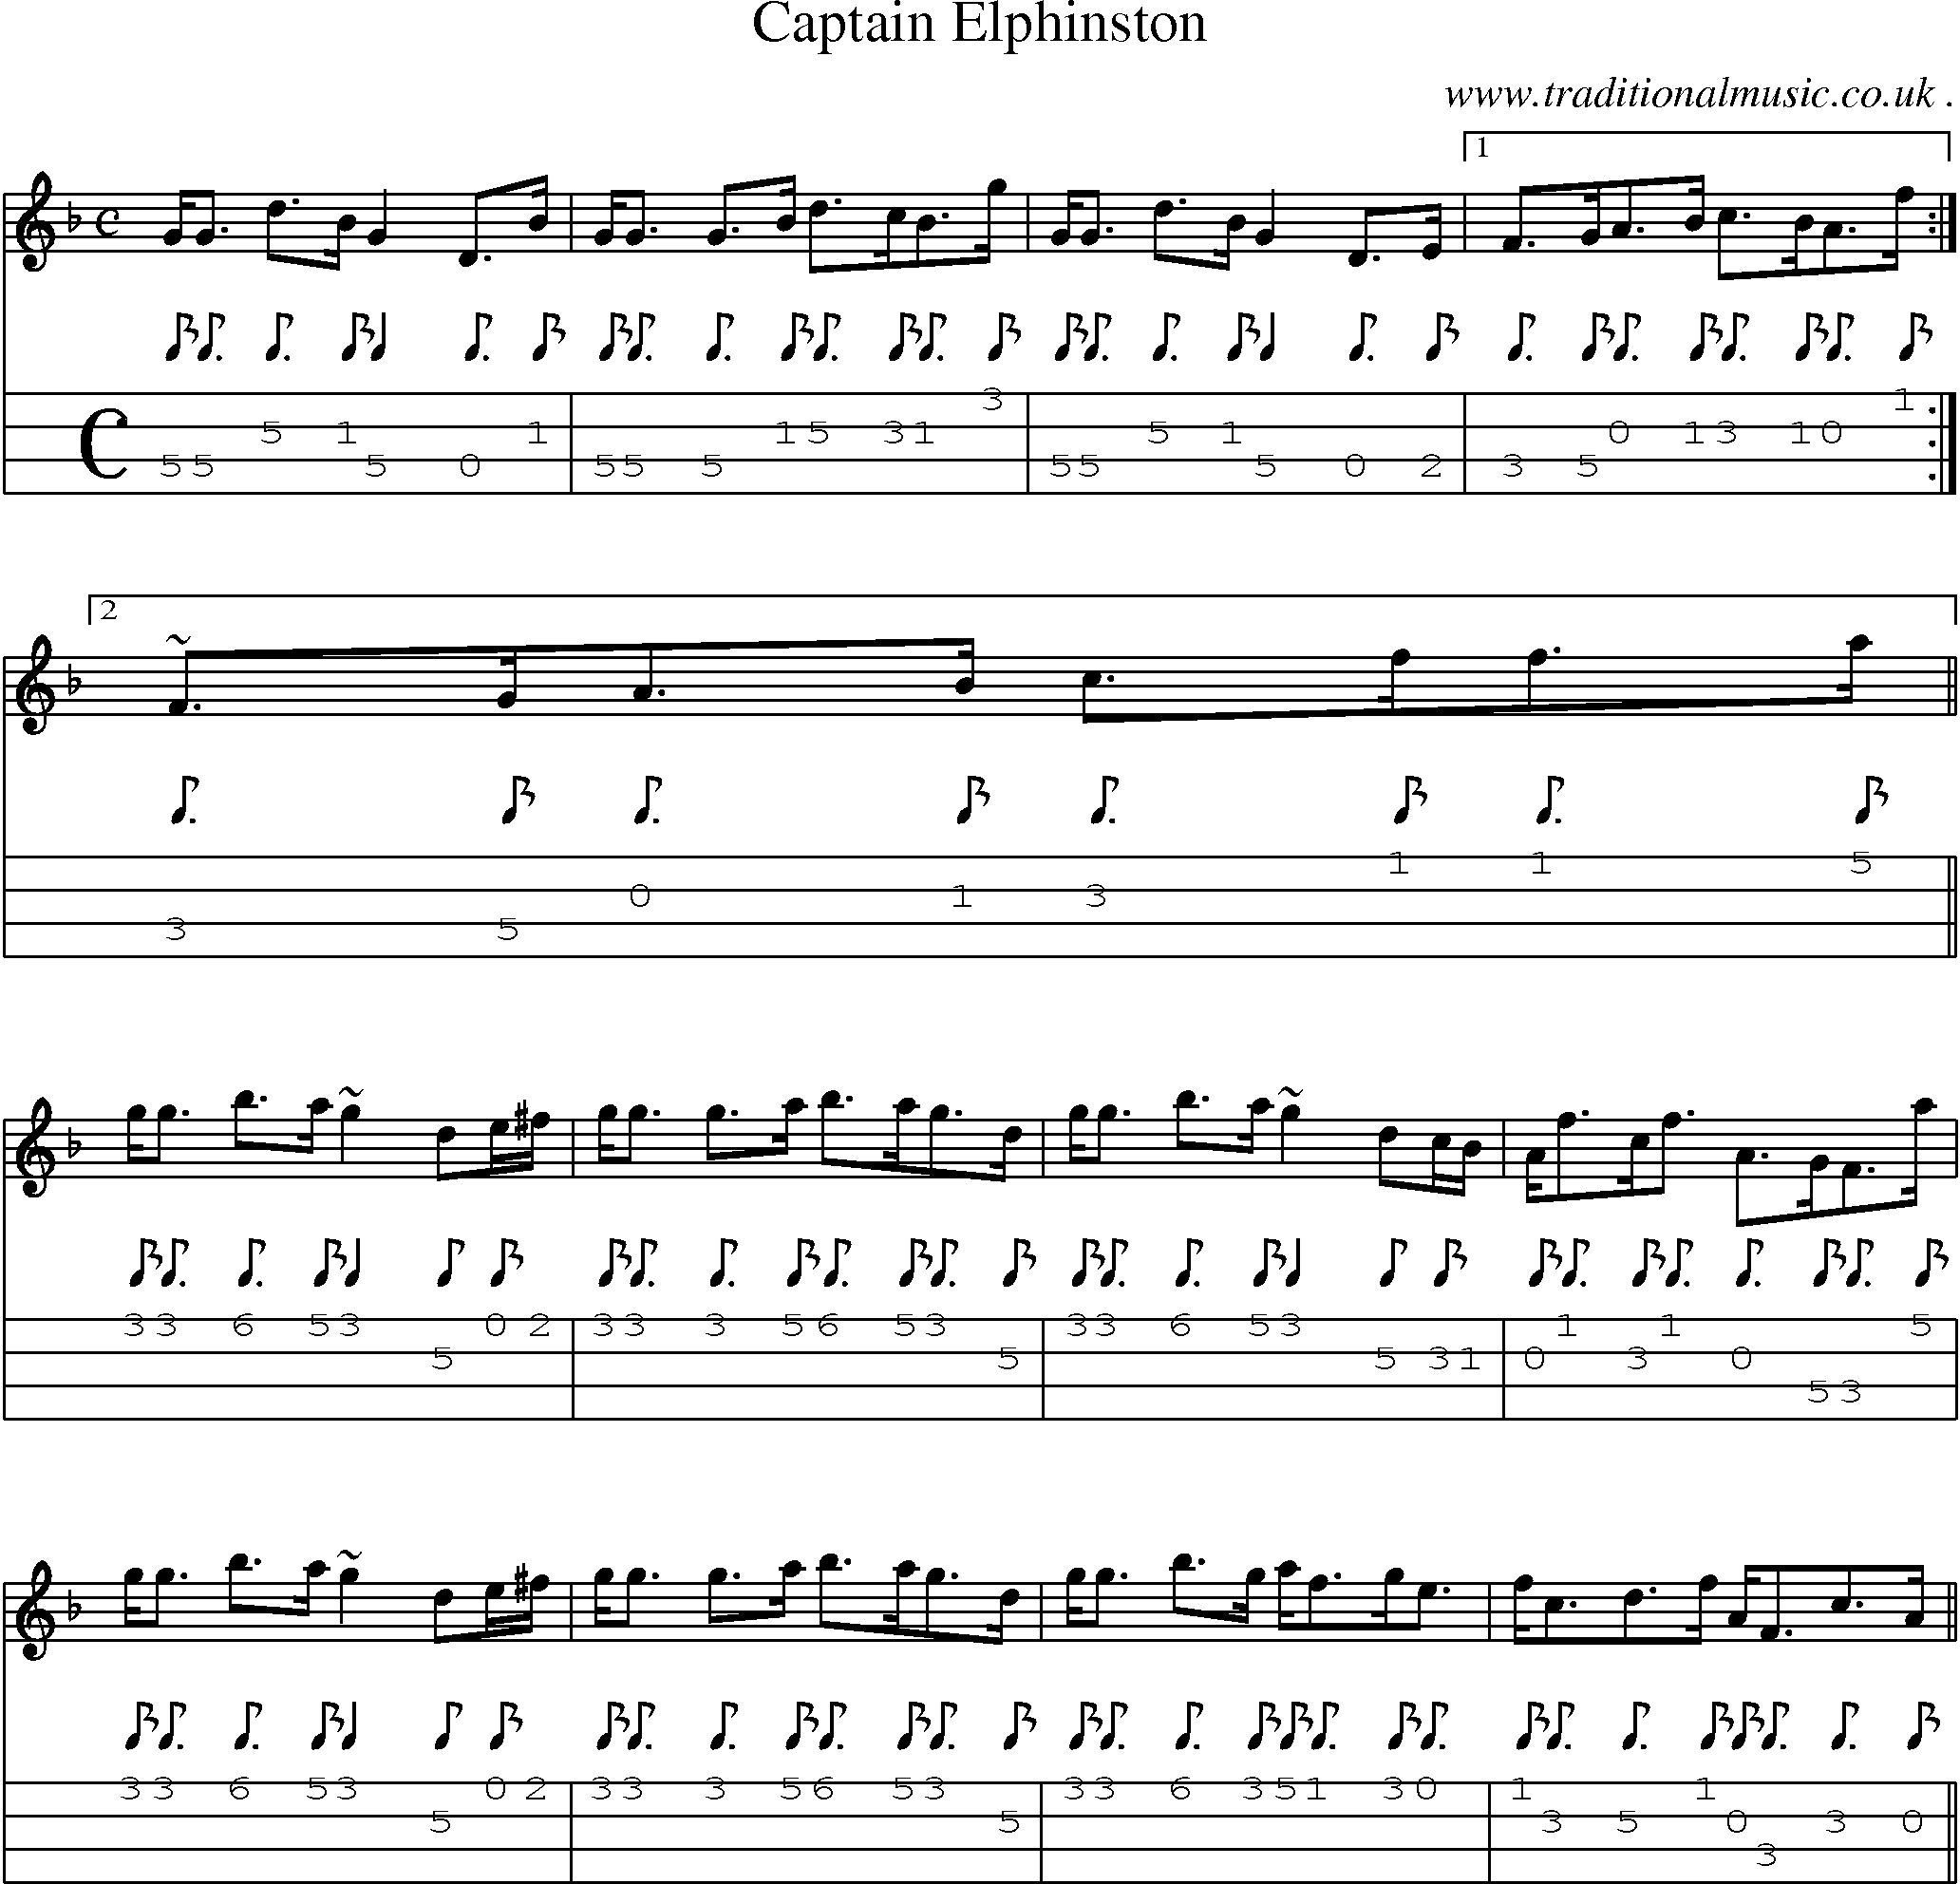 Sheet-music  score, Chords and Mandolin Tabs for Captain Elphinston